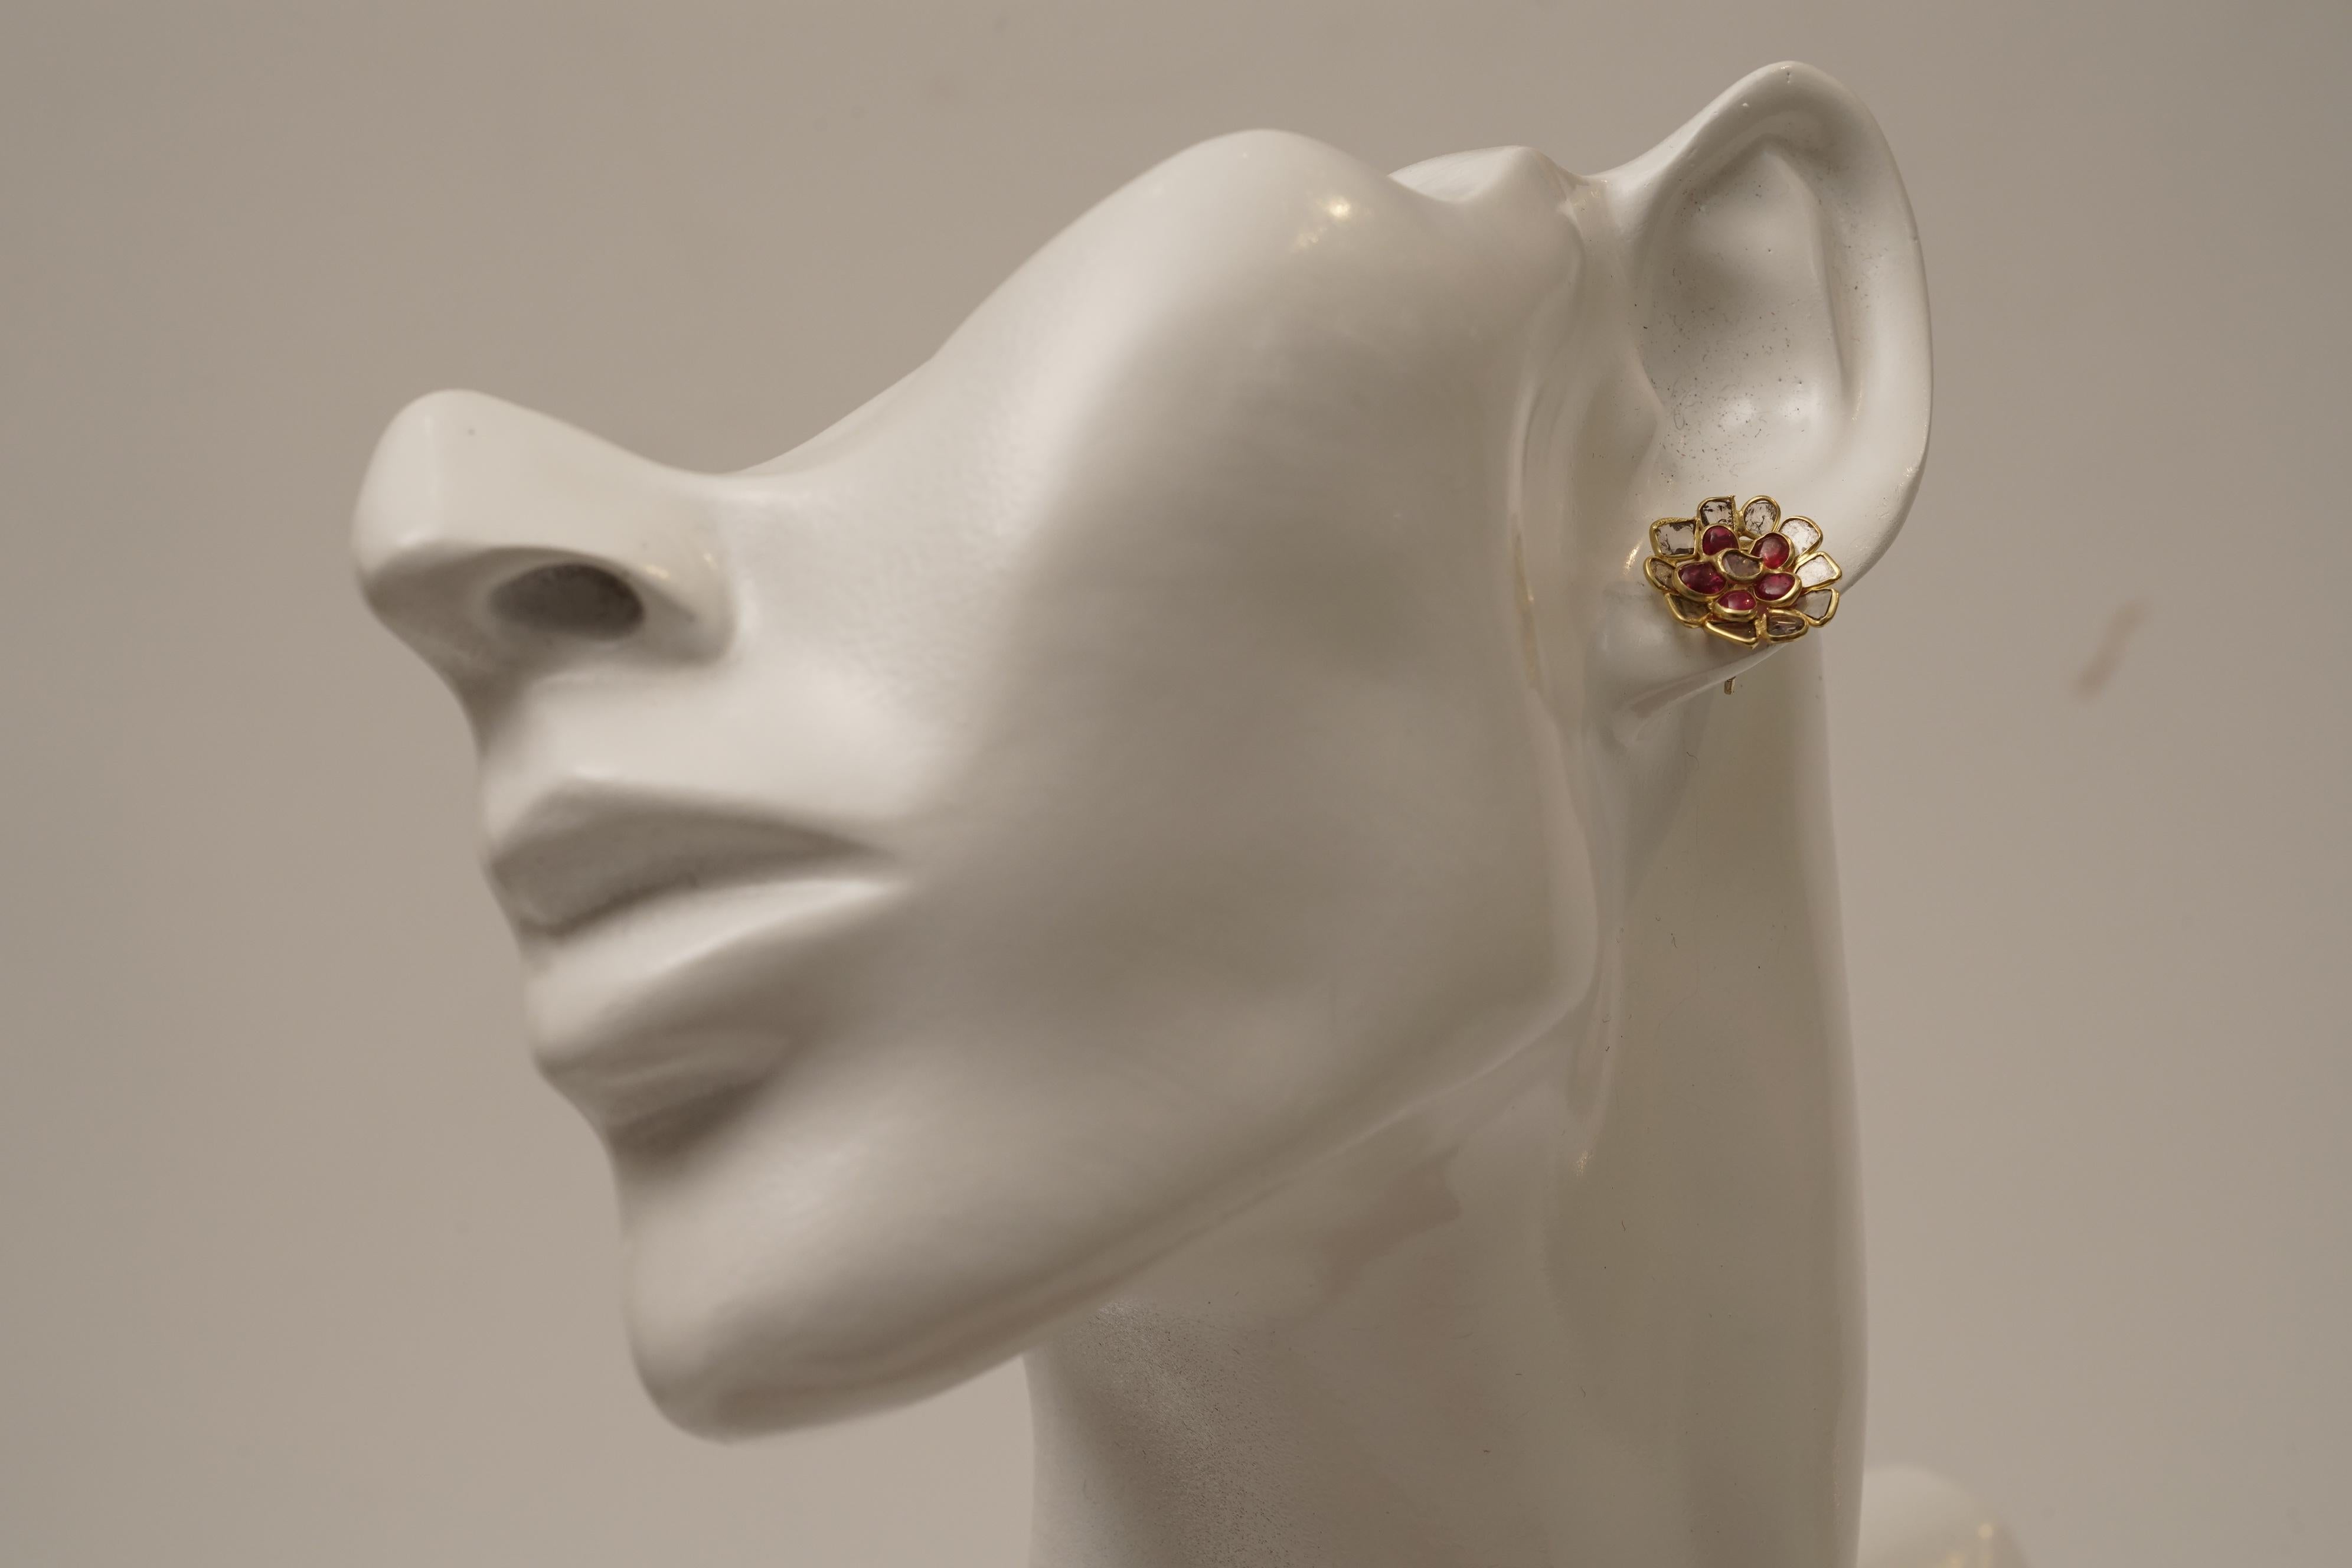 In a flower motif, cabochon rubies and rose cut diamonds comprise the petals of these stud earrings.  All set in 22K gold, for pierced ears.  Not your typical stud earring.  Rose cut diamonds are intentionally irregular, just enough facets to